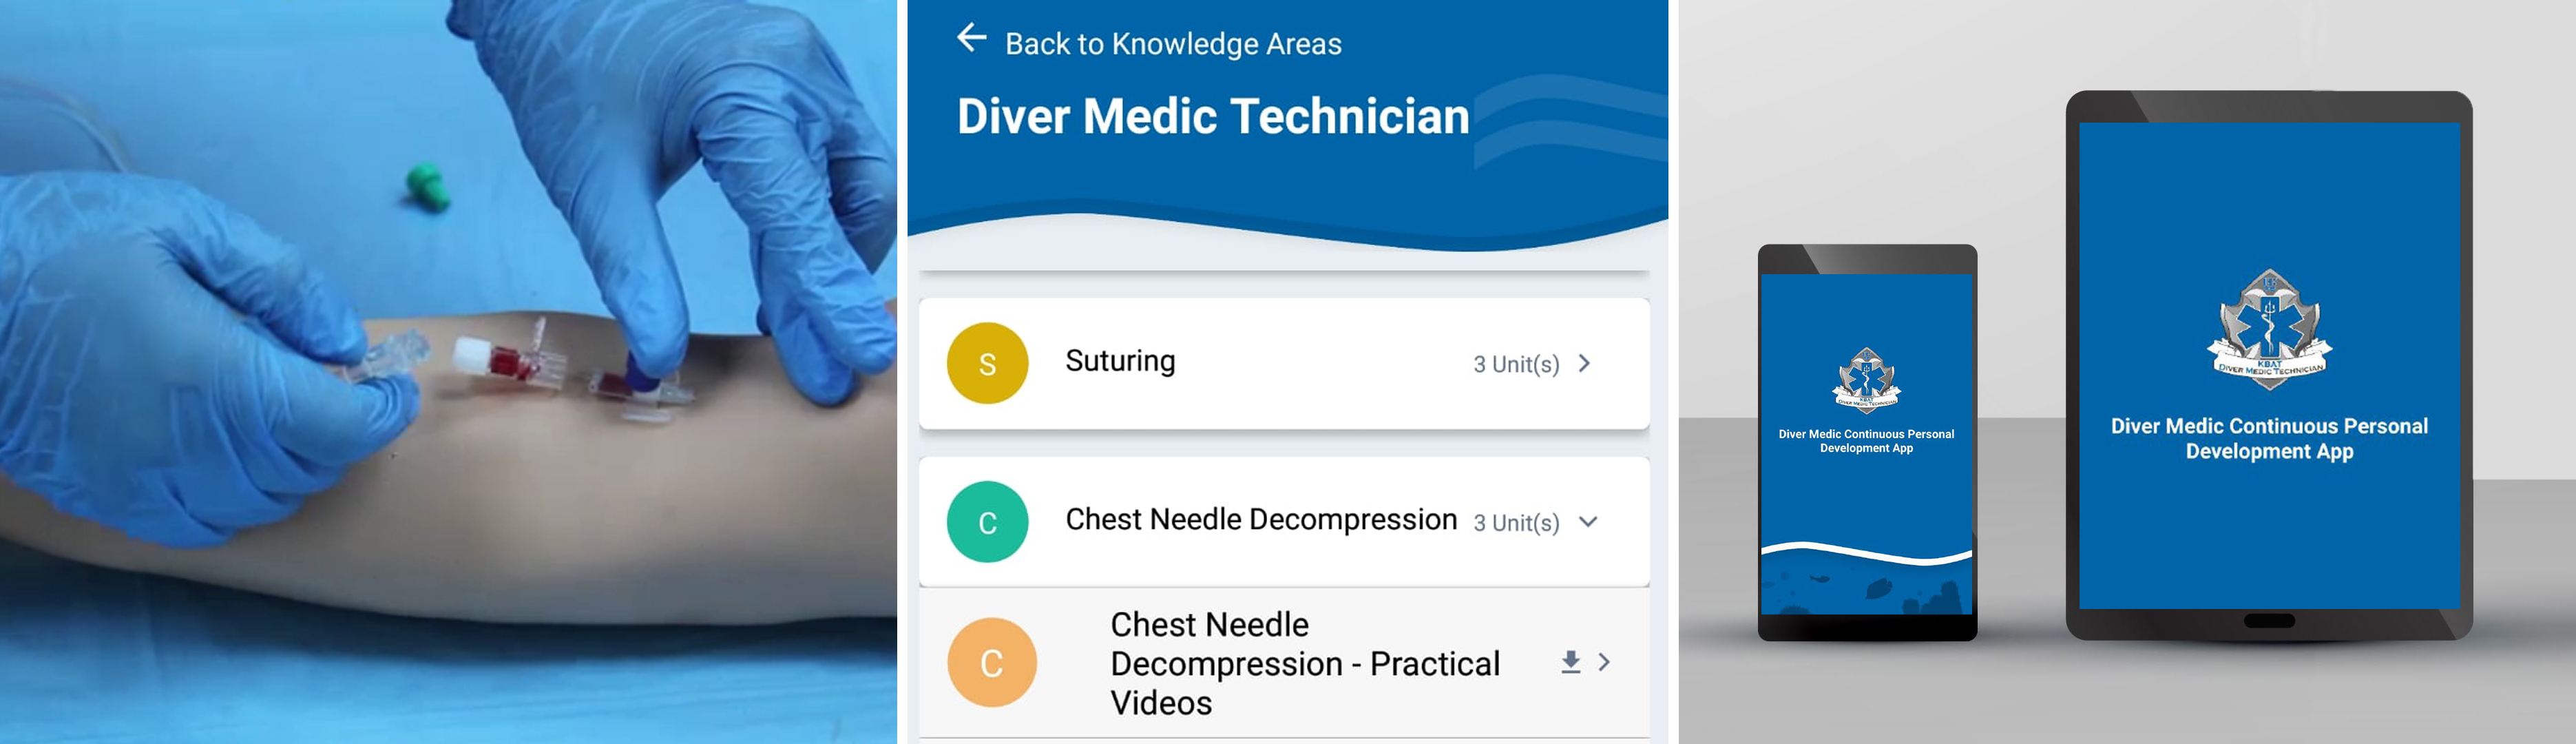 Benefits of Mobile APP Training for Diver Medic, Safety and Diving Related Courses